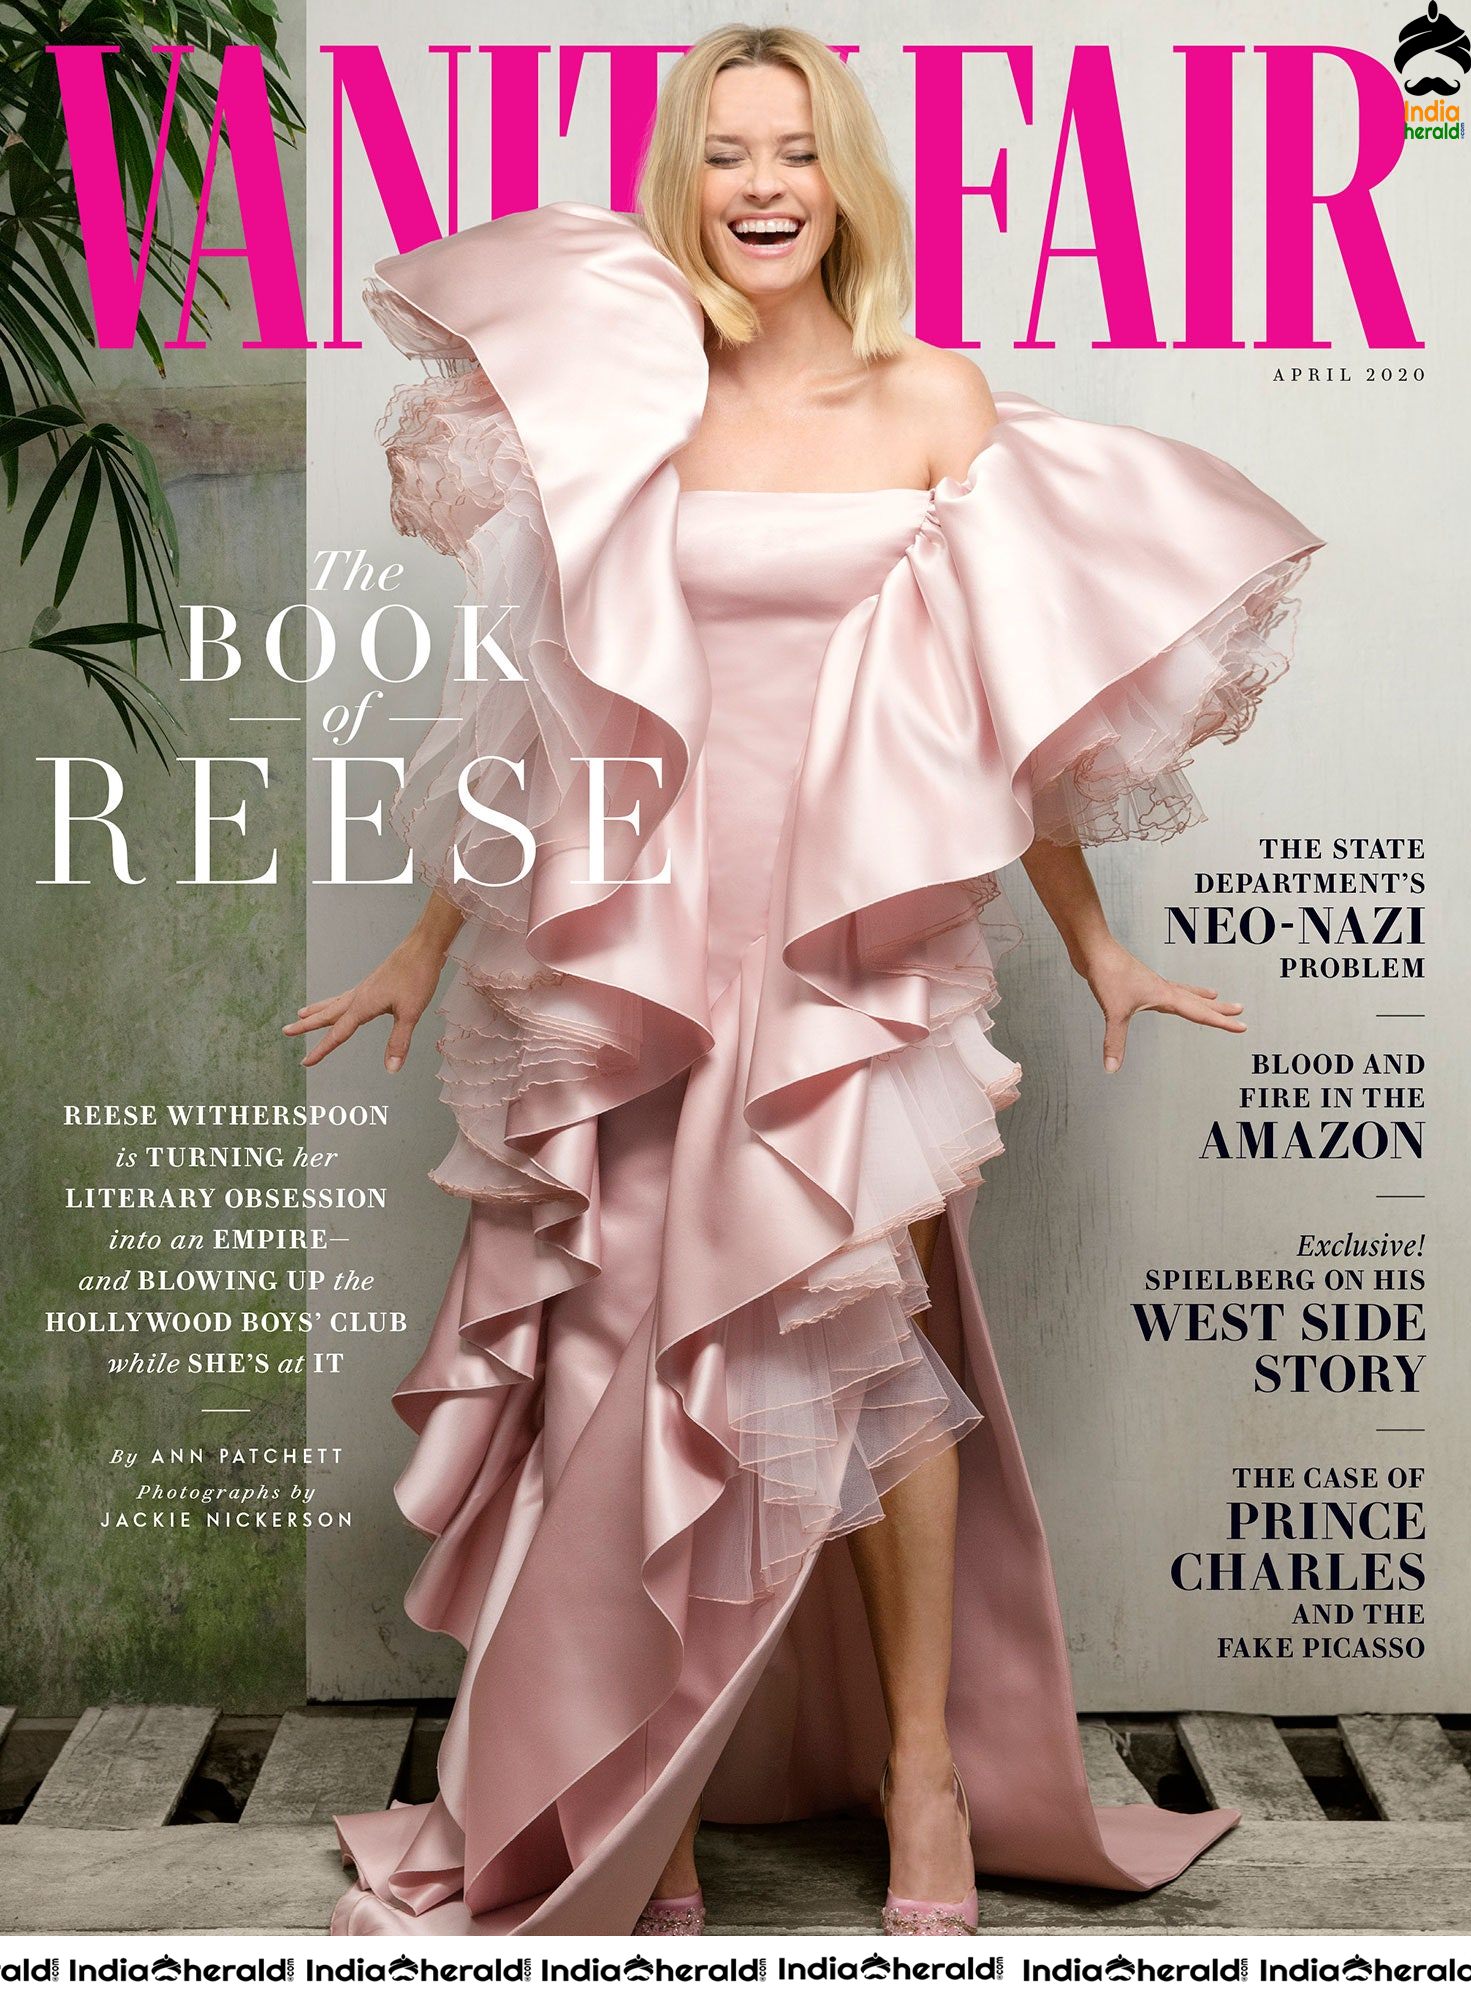 Reese Witherspoon Hot Photoshoot for Vanity Fair Magazine April 2020 Edition